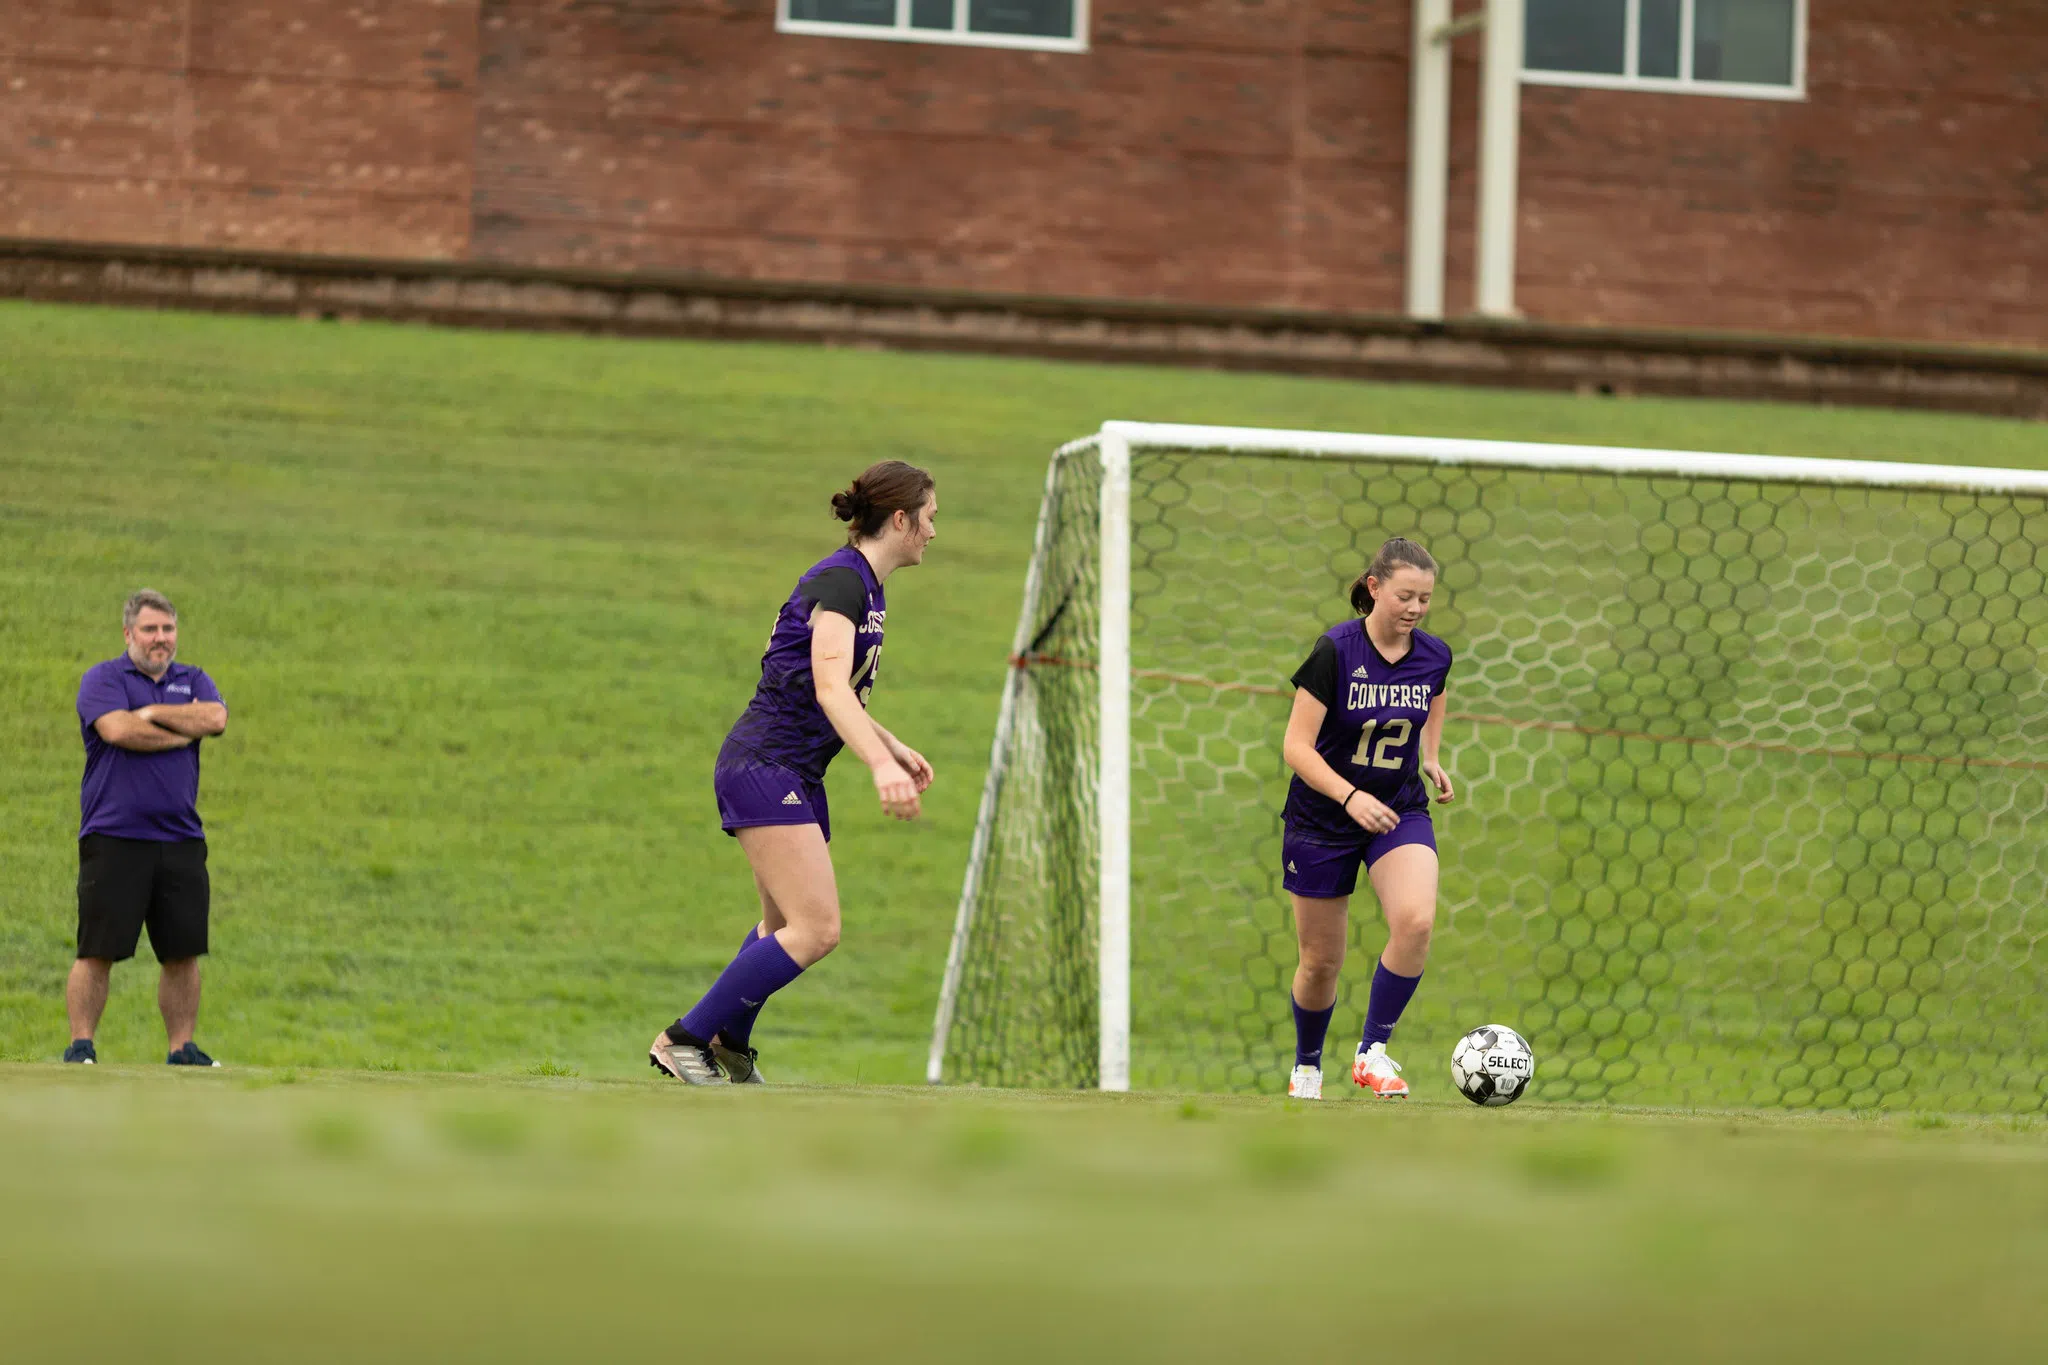 Two female players in soccer uniforms kick a ball near a large soccer goal. A male coach looks on from the sidelines. A portion of a brick building appears in the background.